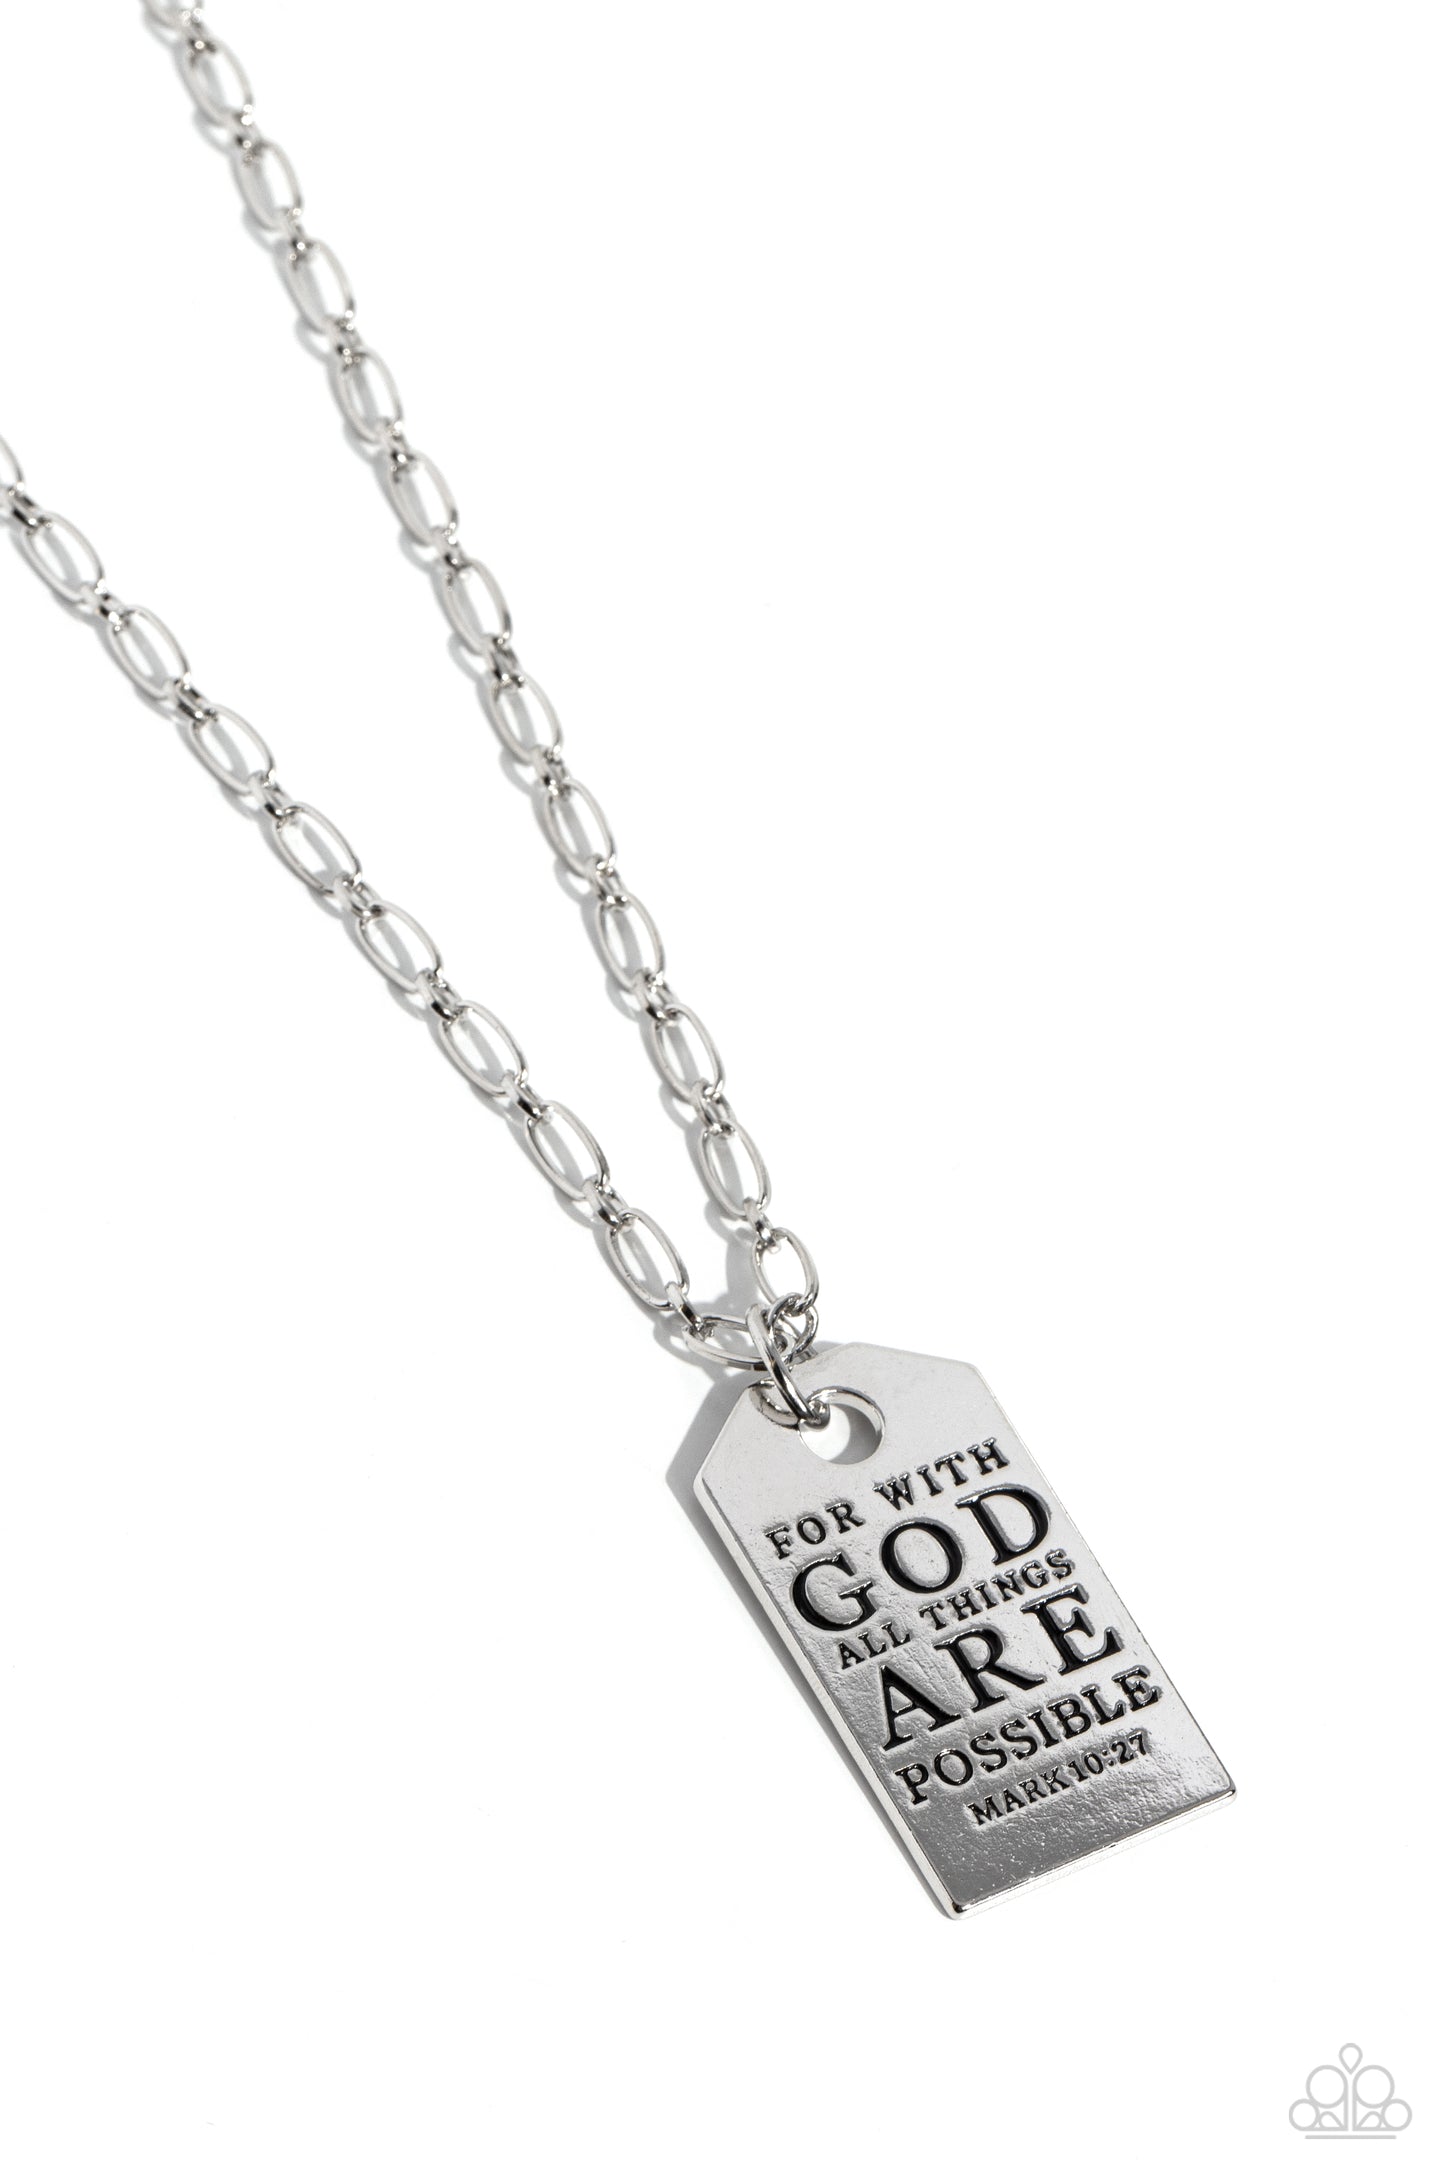 Possible Pendant Silver Inspirational Necklace - Paparazzi Accessories  Dangling from simple silver links, a sleek silver hoop boosts a rounded rectangular plate. Stamped on the high-sheen silver pendant, the inspiring phrase "For with GOD all things ARE possible" is listed with the scripture reference "Mark 10:27" just below it in a more dainty font for a hopeful finish. Features an adjustable clasp closure.  Sold as one individual necklace. Includes one pair of matching earrings.  Sku:  P2WD-SVXX-310XX